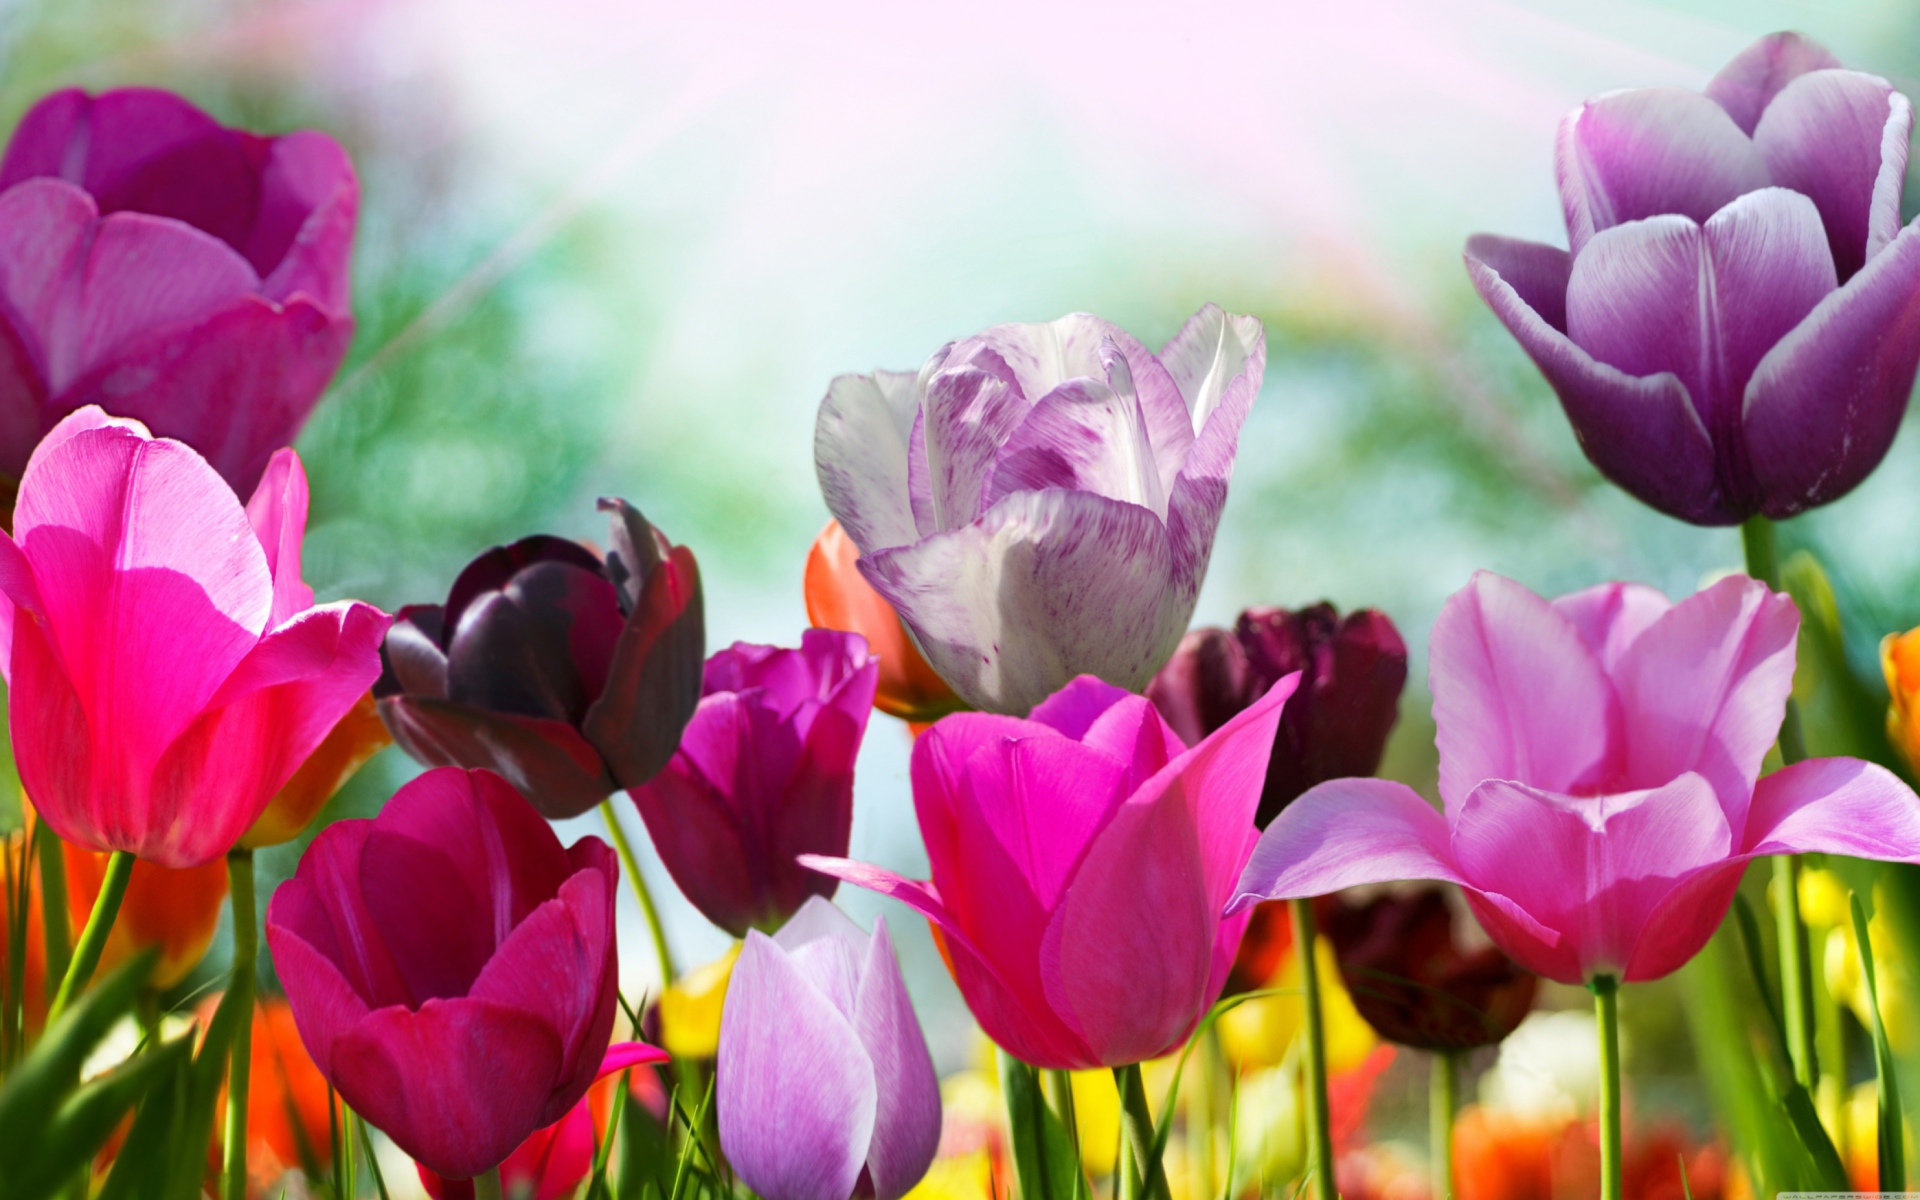 Colorful Tulips wallpaper 1920x1200